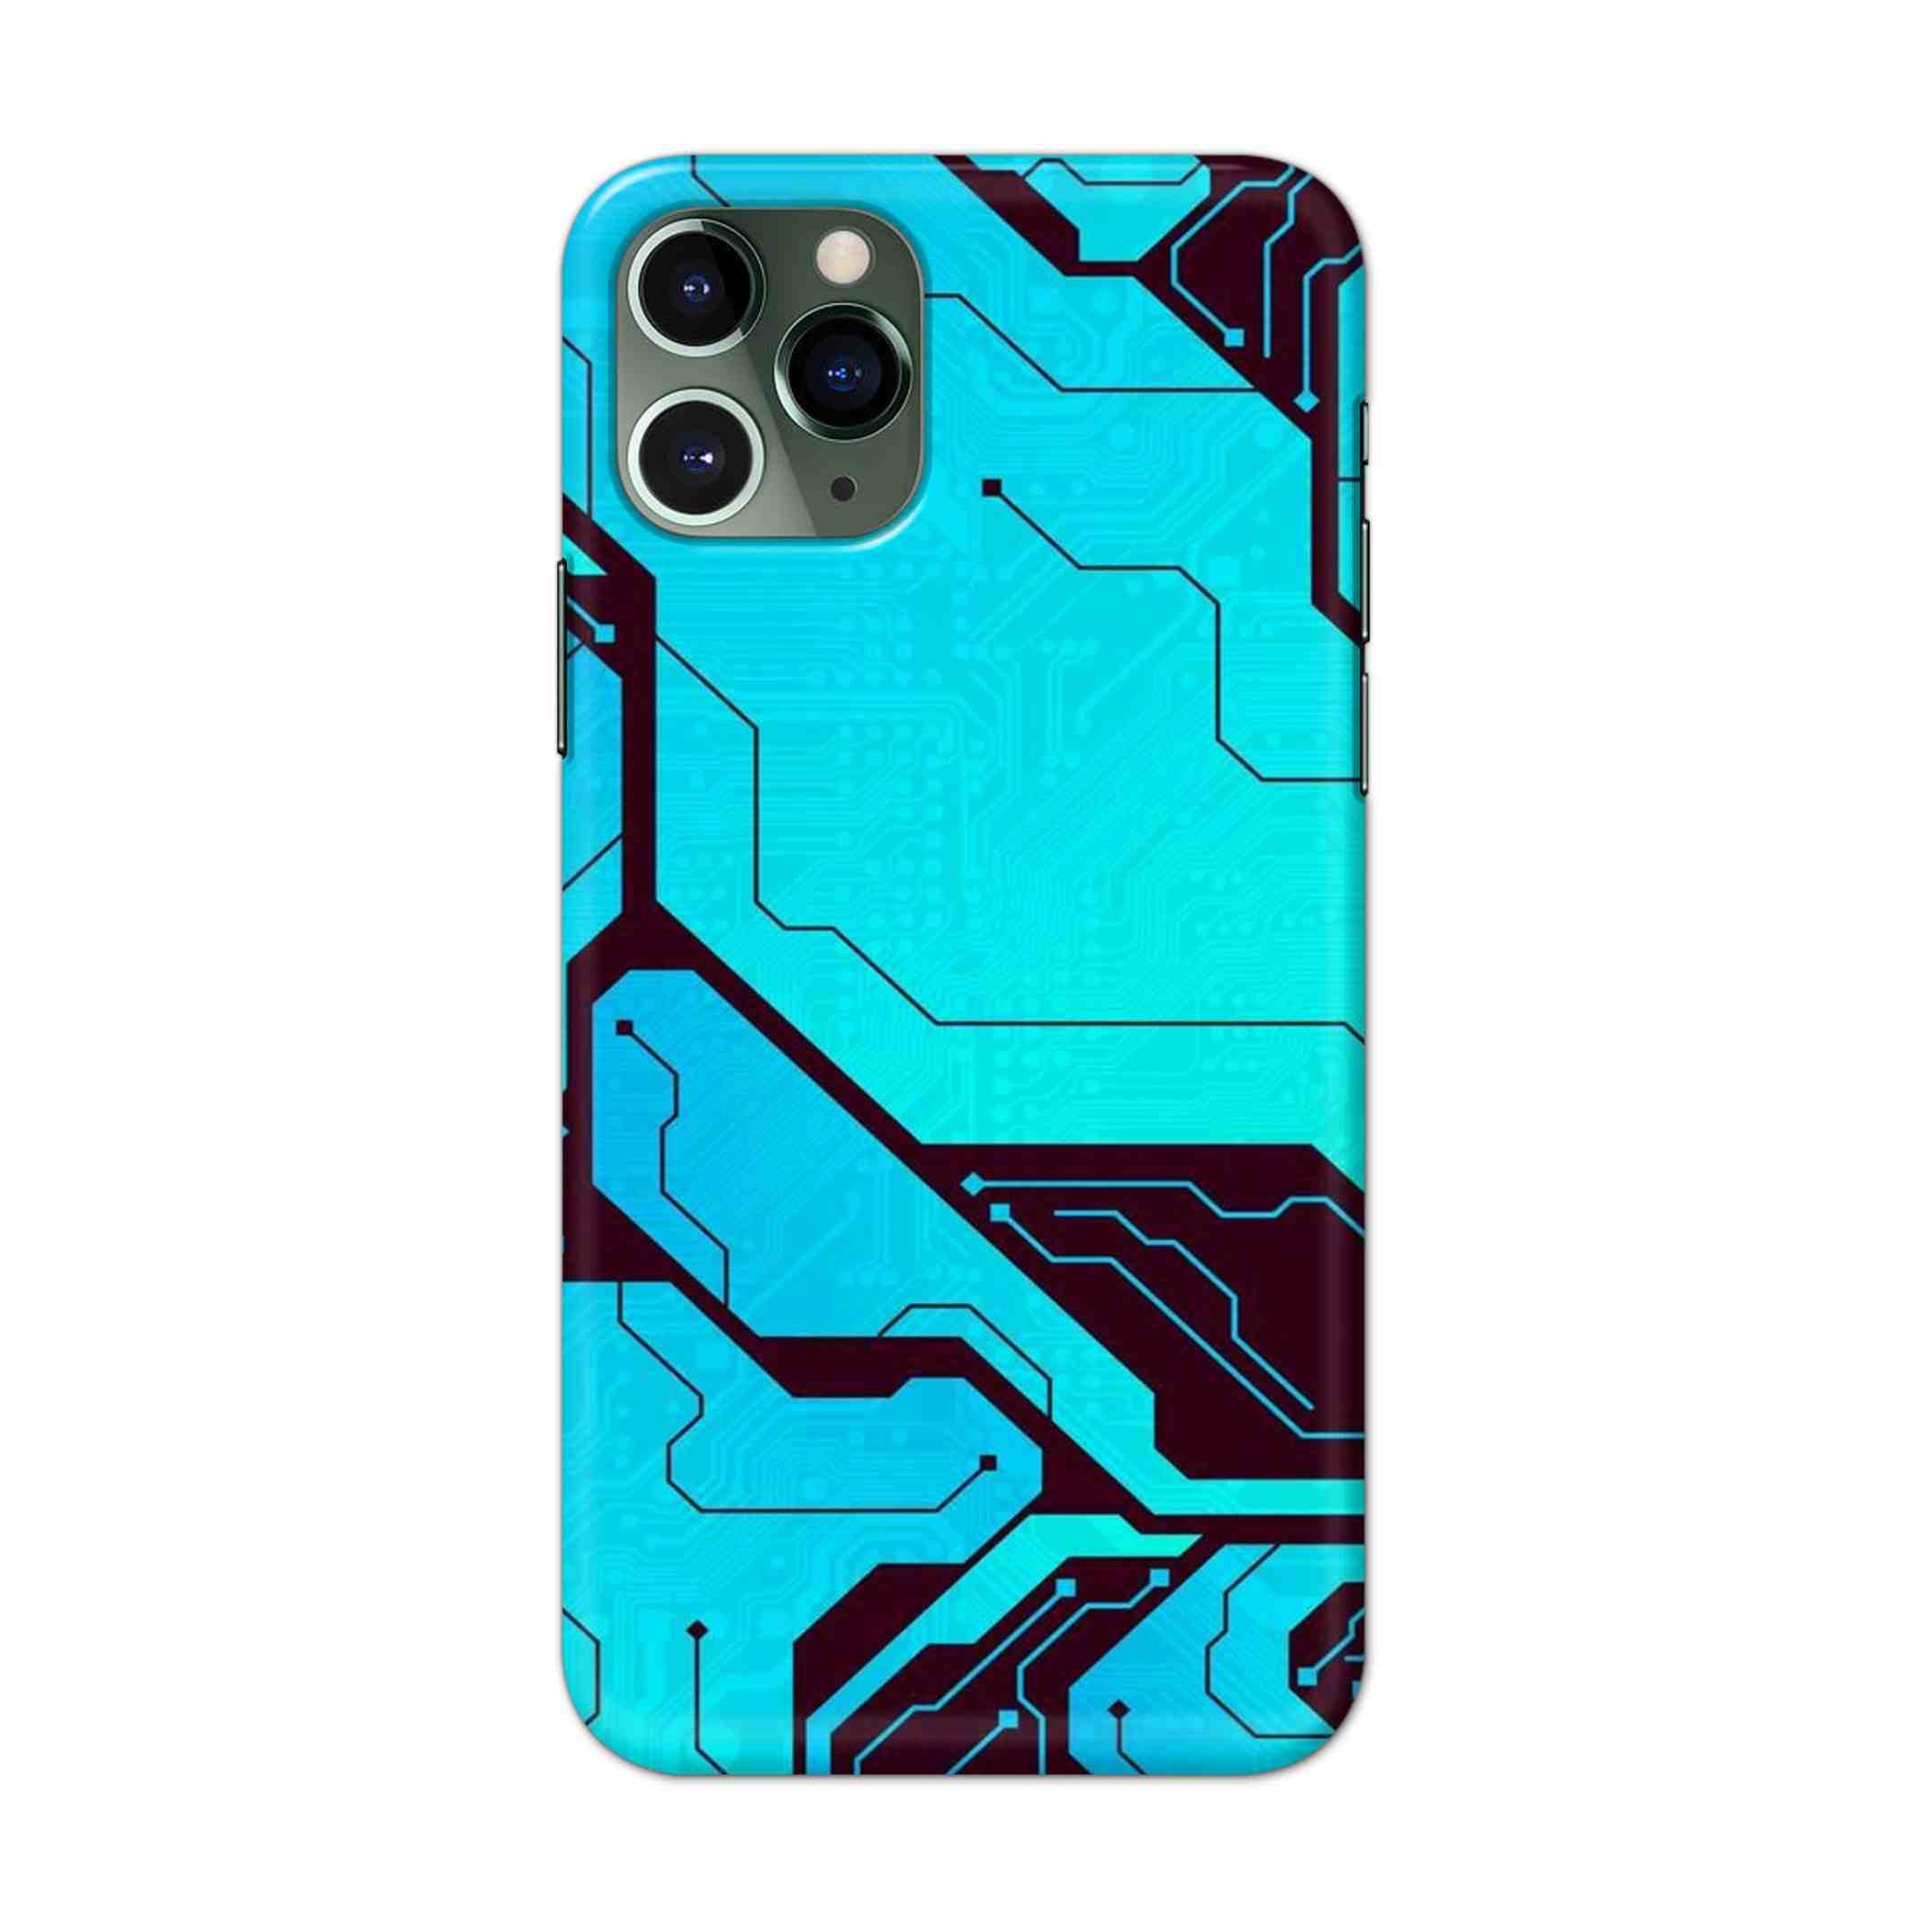 Buy Futuristic Line Hard Back Mobile Phone Case/Cover For iPhone 11 Pro Online